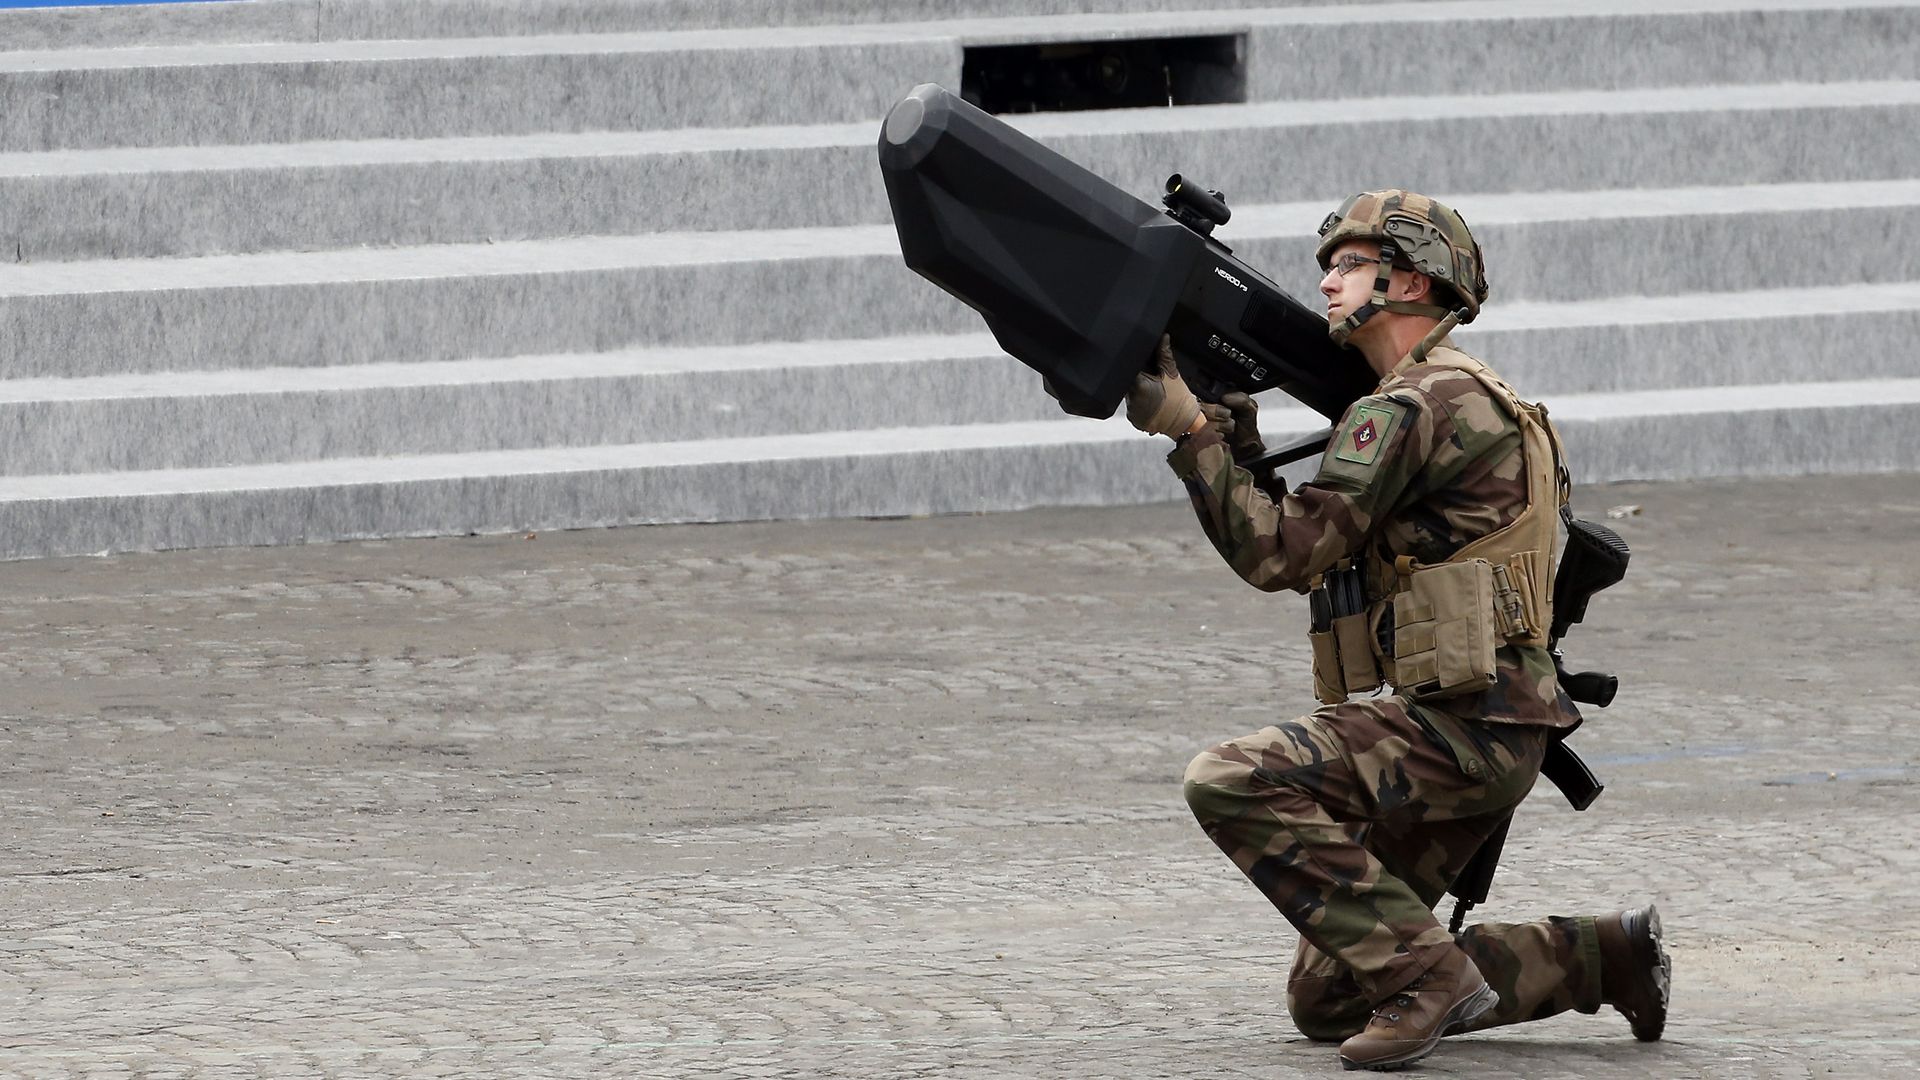 A man crouches in military fatigues and points a rifle-like device toward the sky